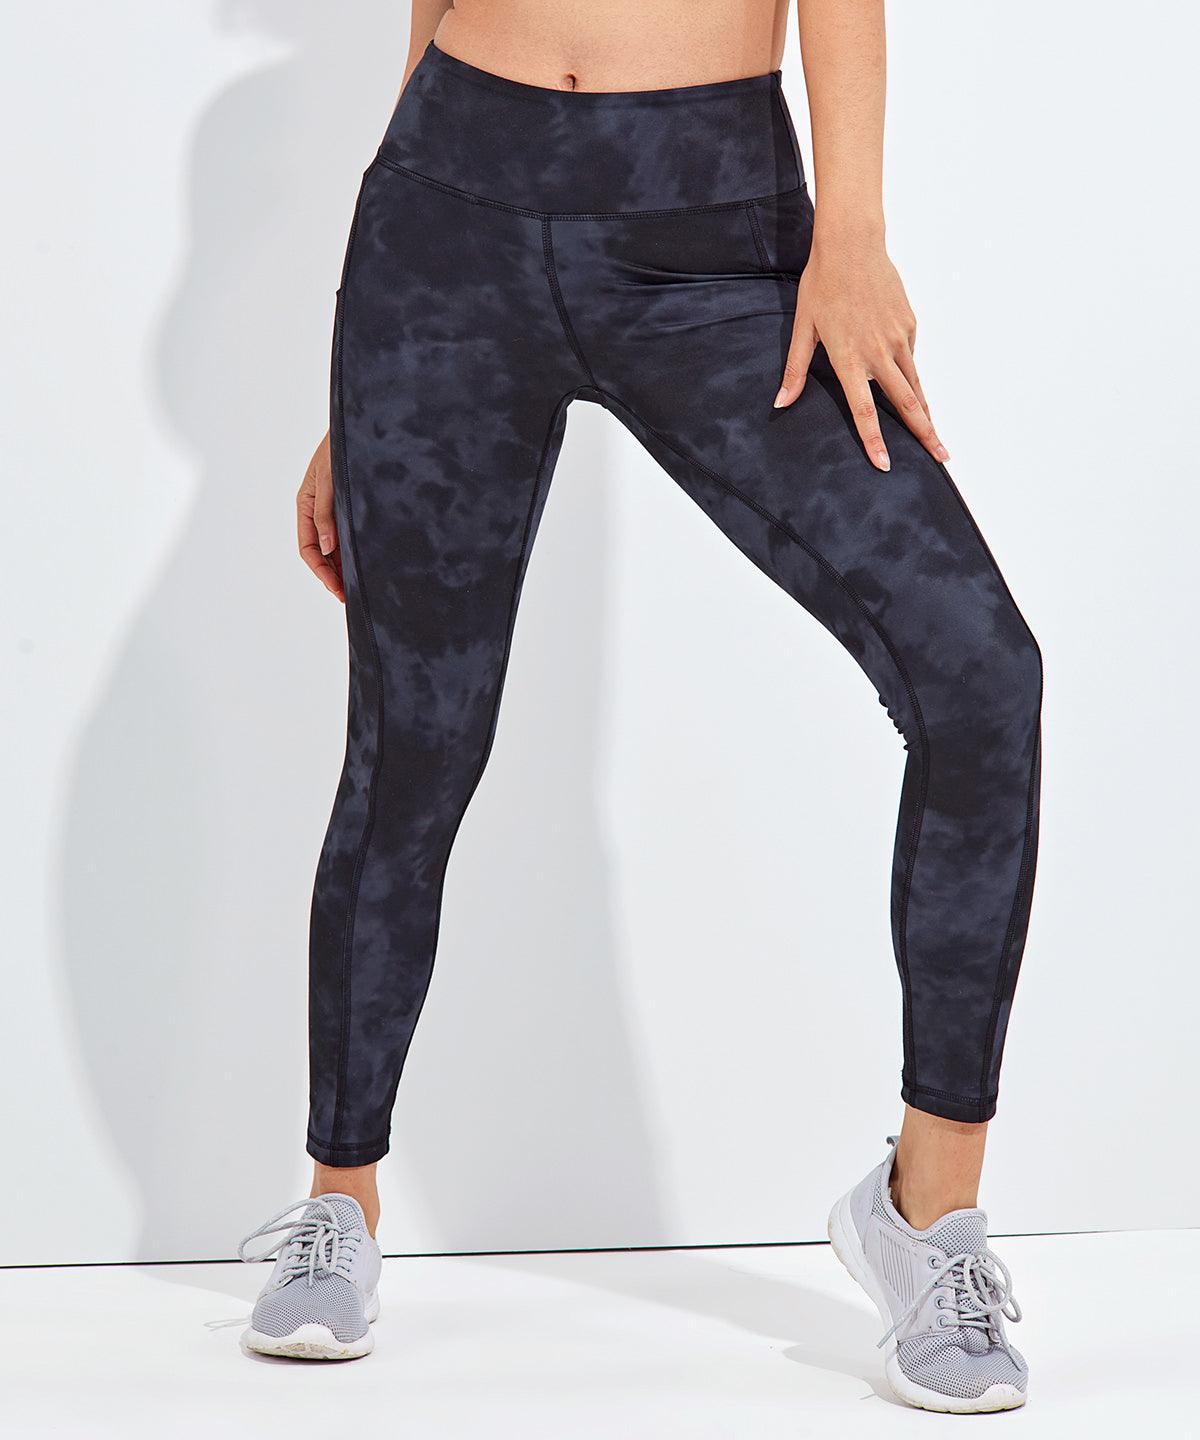 Black - Women's TriDri® recycled performance full length leggings Leggings TriDri® Activewear & Performance, Back to the Gym, Exclusives, Leggings, New Styles For 2022, Organic & Conscious, Women's Fashion Schoolwear Centres